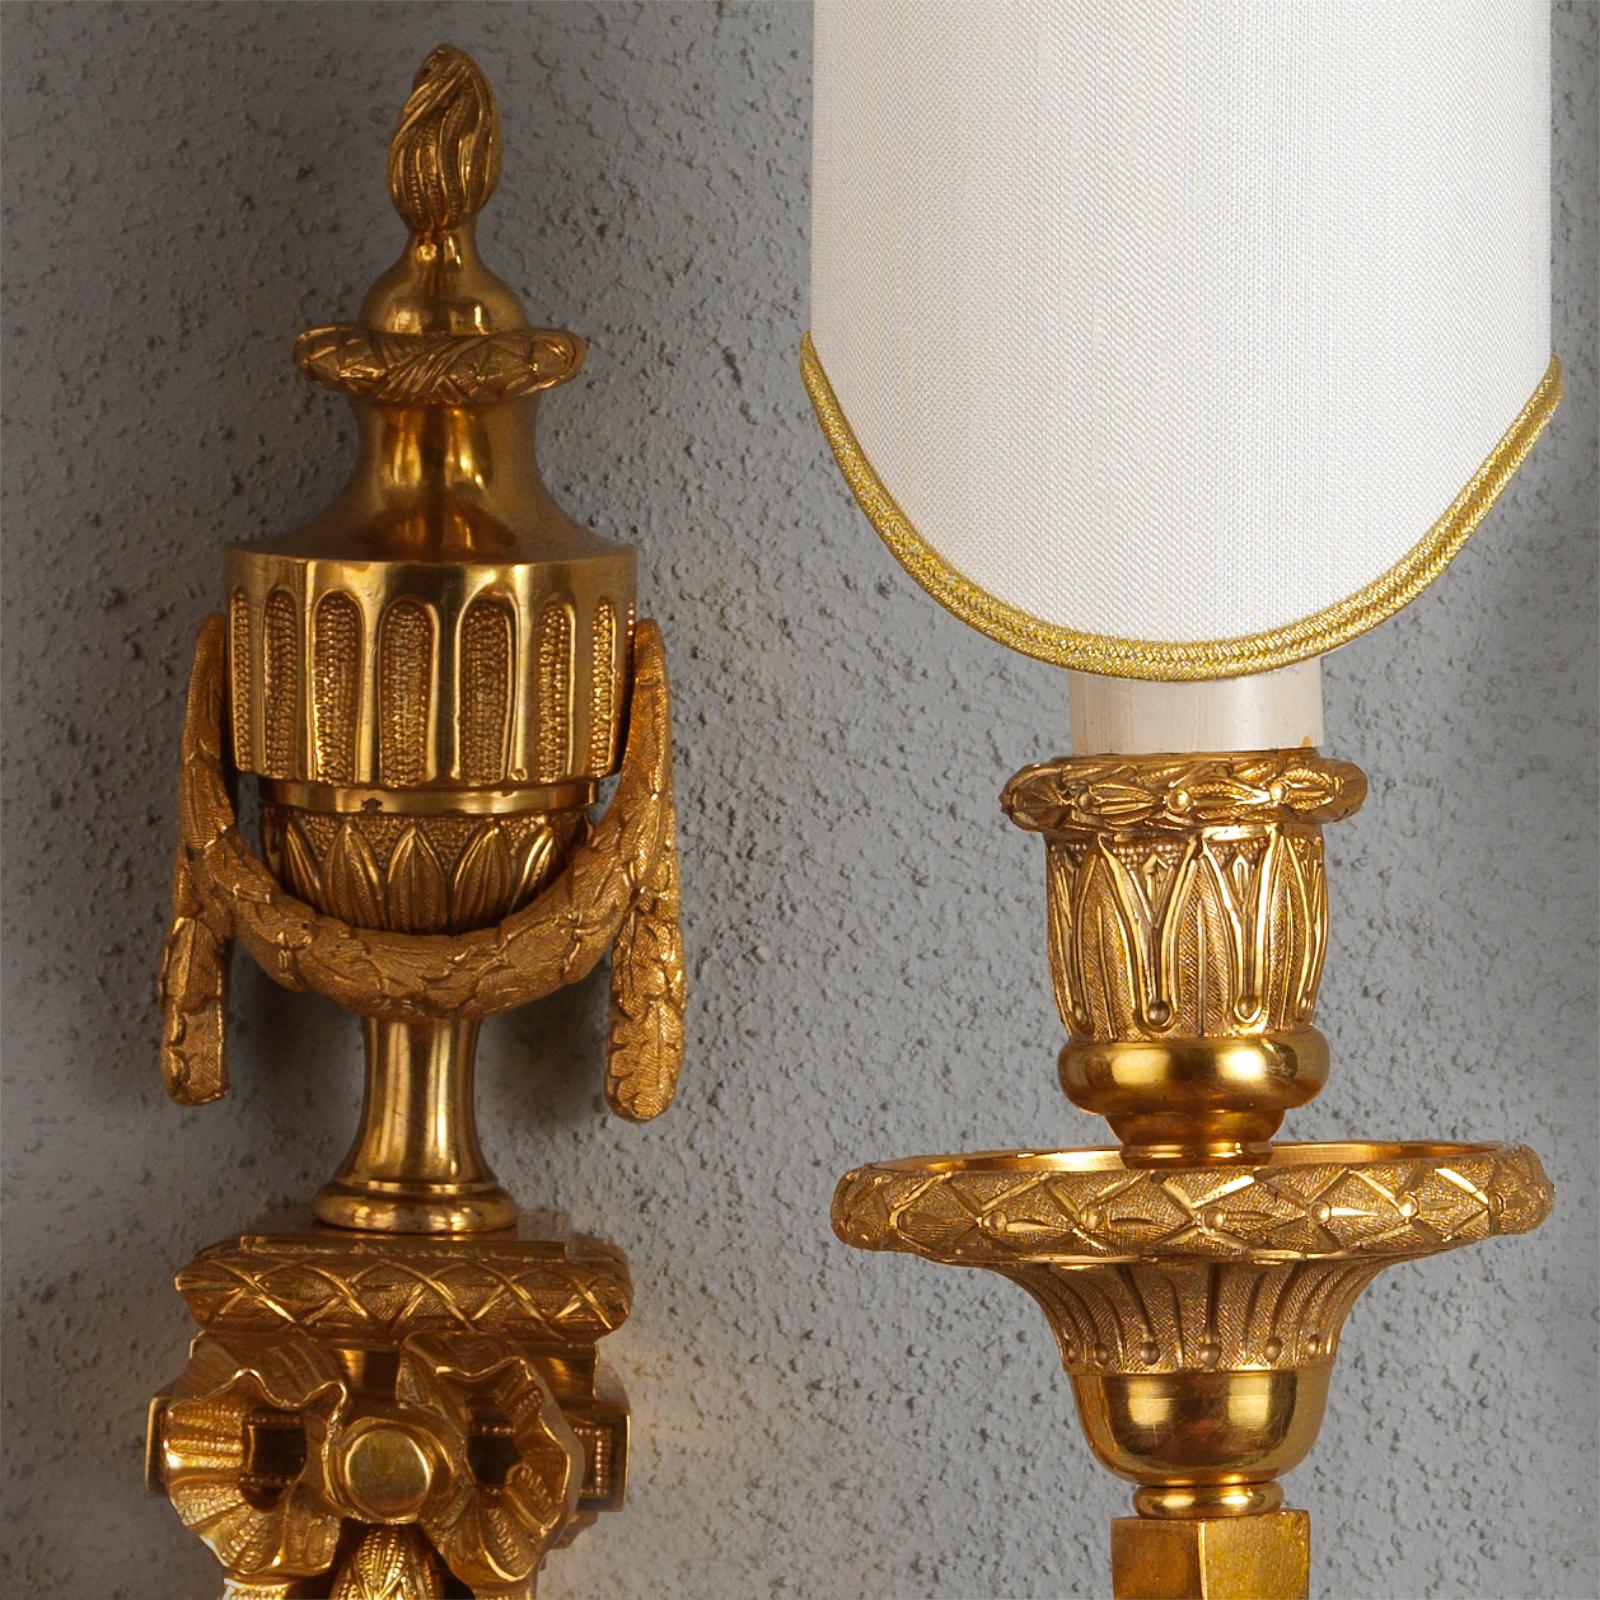 This precious Set of Empire Style Gilt Bronze Wall Sconces by Gherardo Degli Albizzi features many finely hand chiseled details. This model is typical of French Empire period due to its rich ornamentation with geometric motifs, acanthus leaf volutes